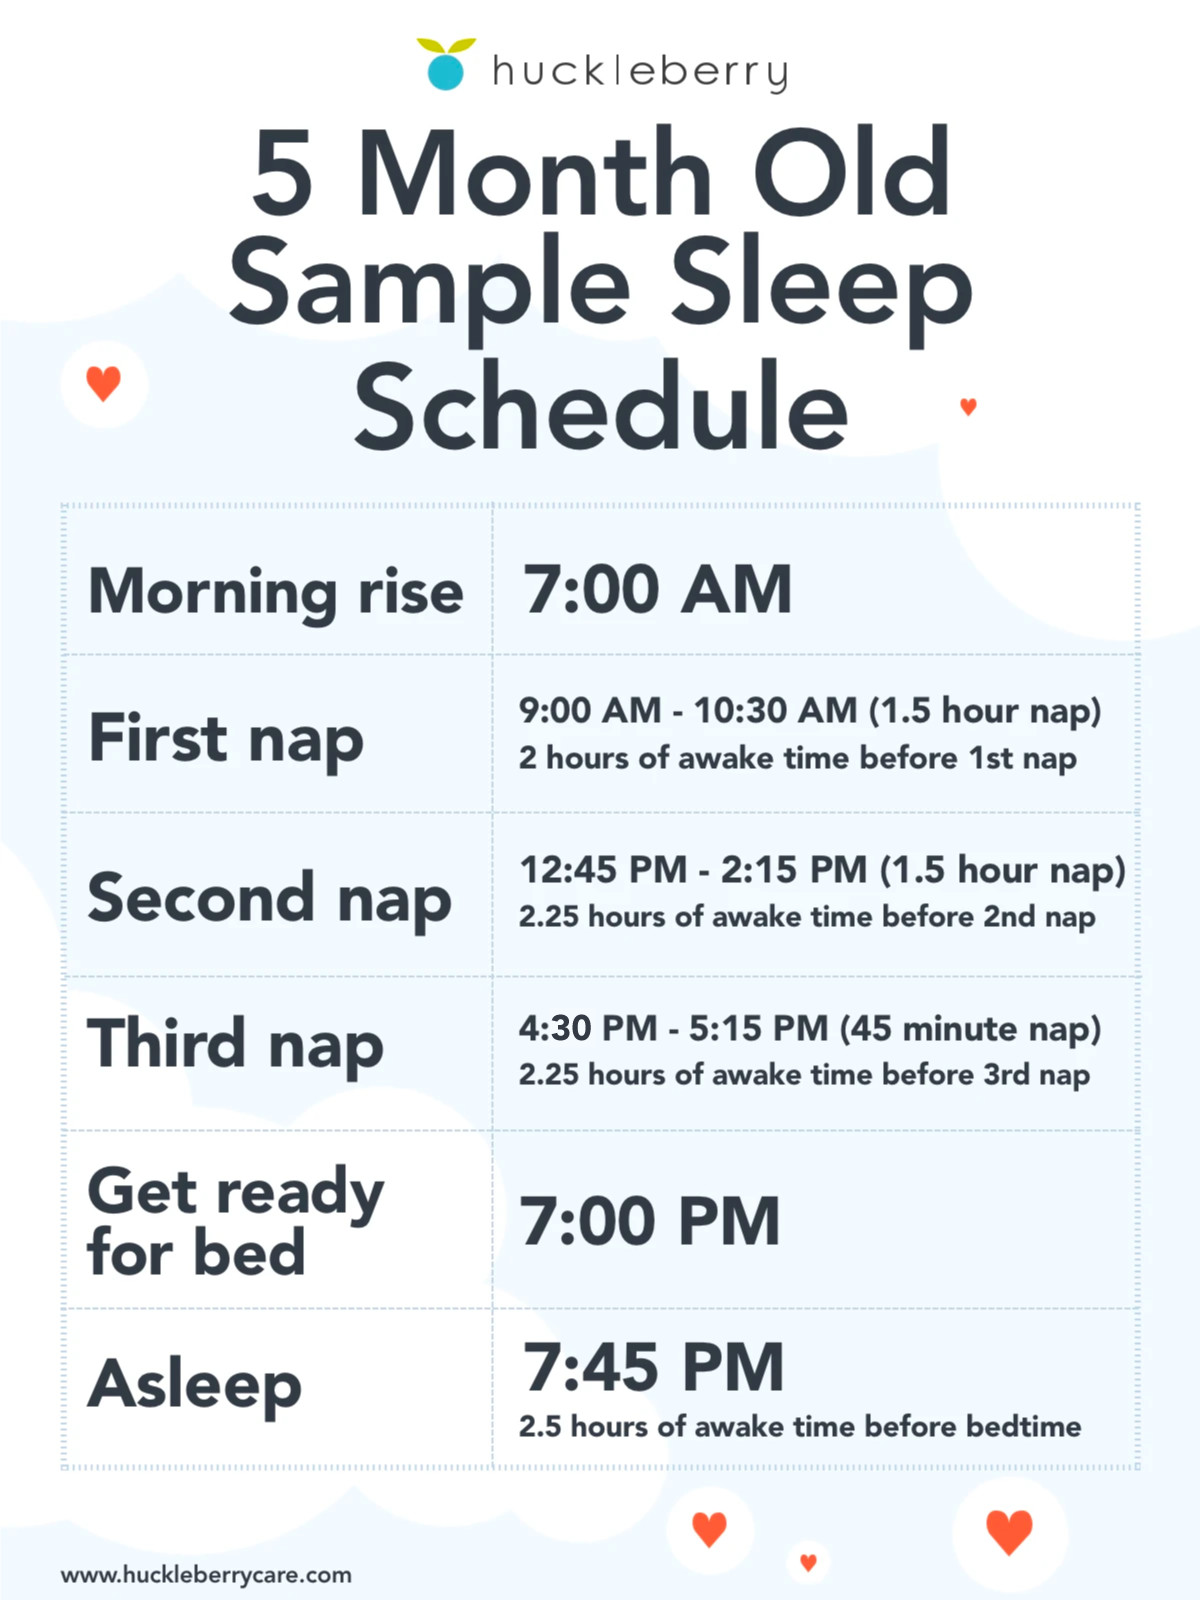 Image of a 5 month old sample sleep schedule.